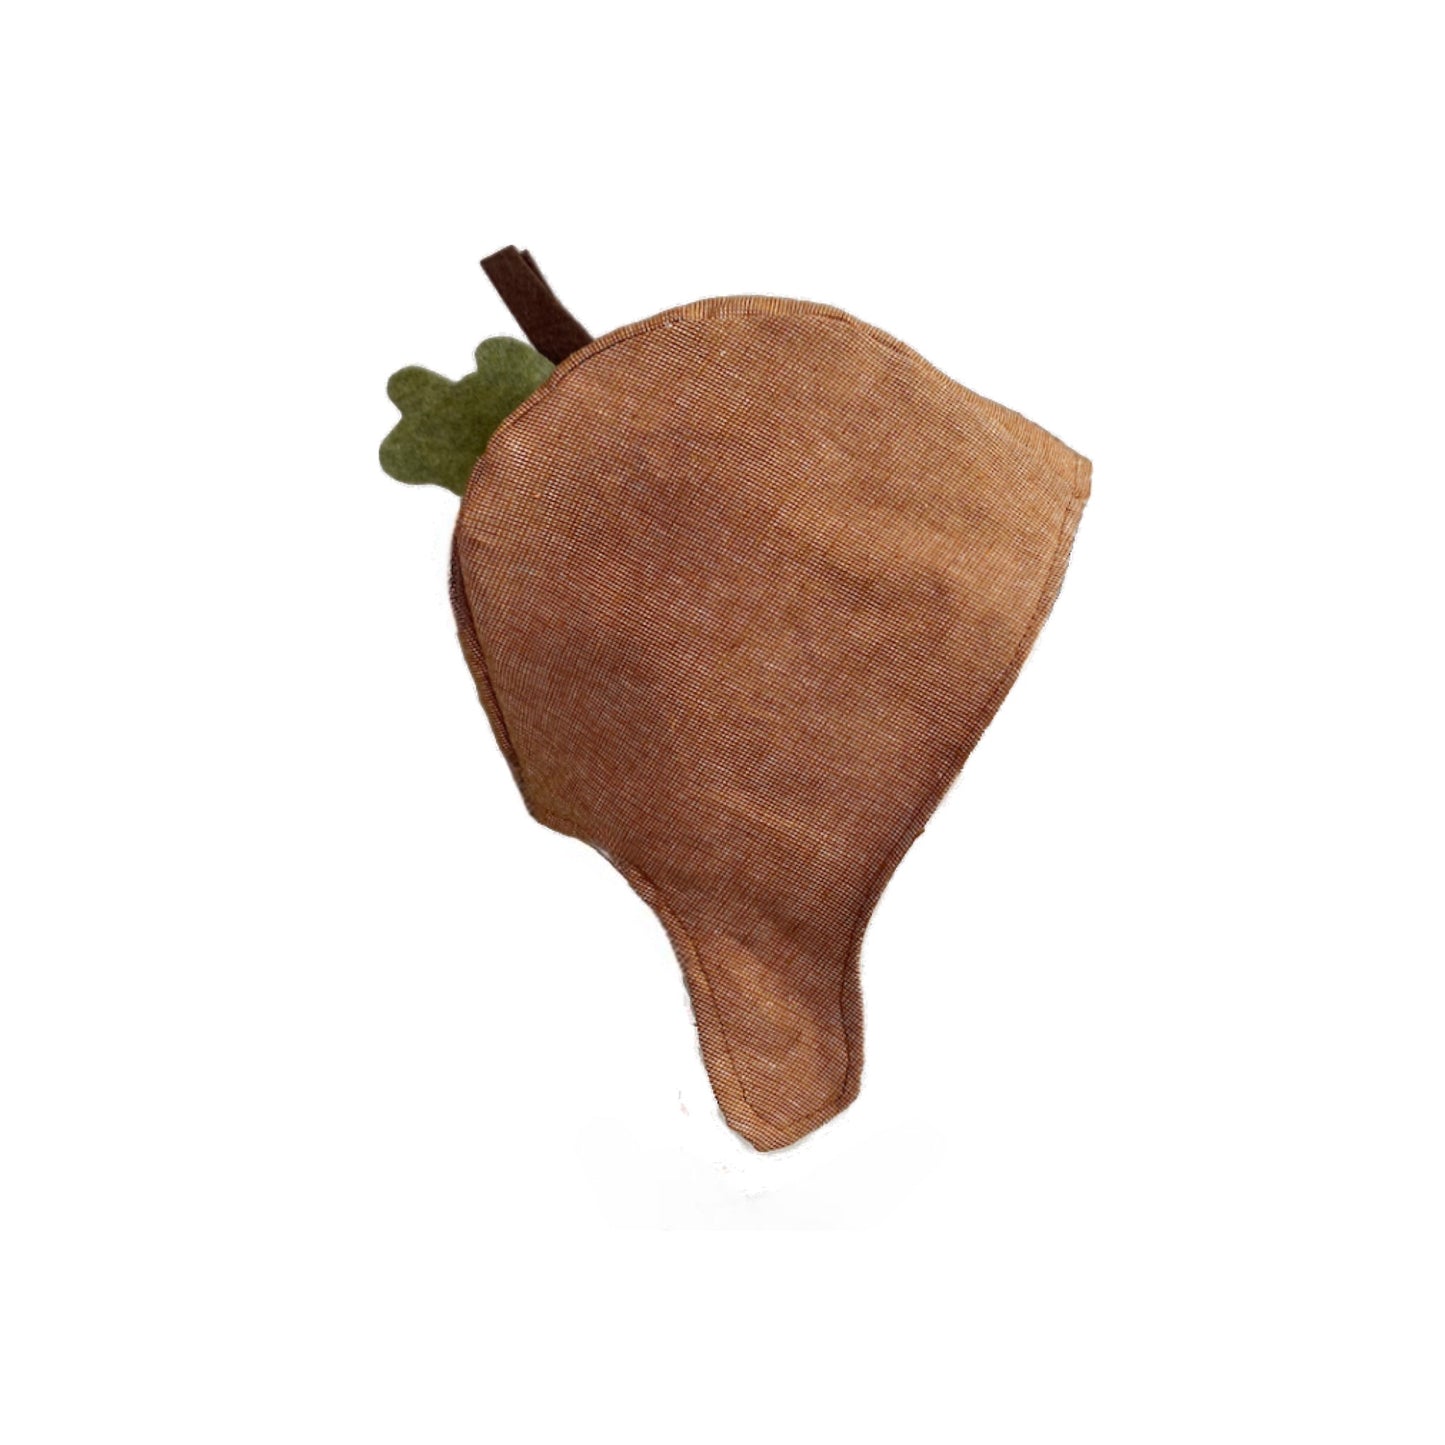 Acorn costume hat for outdoor pretend play.